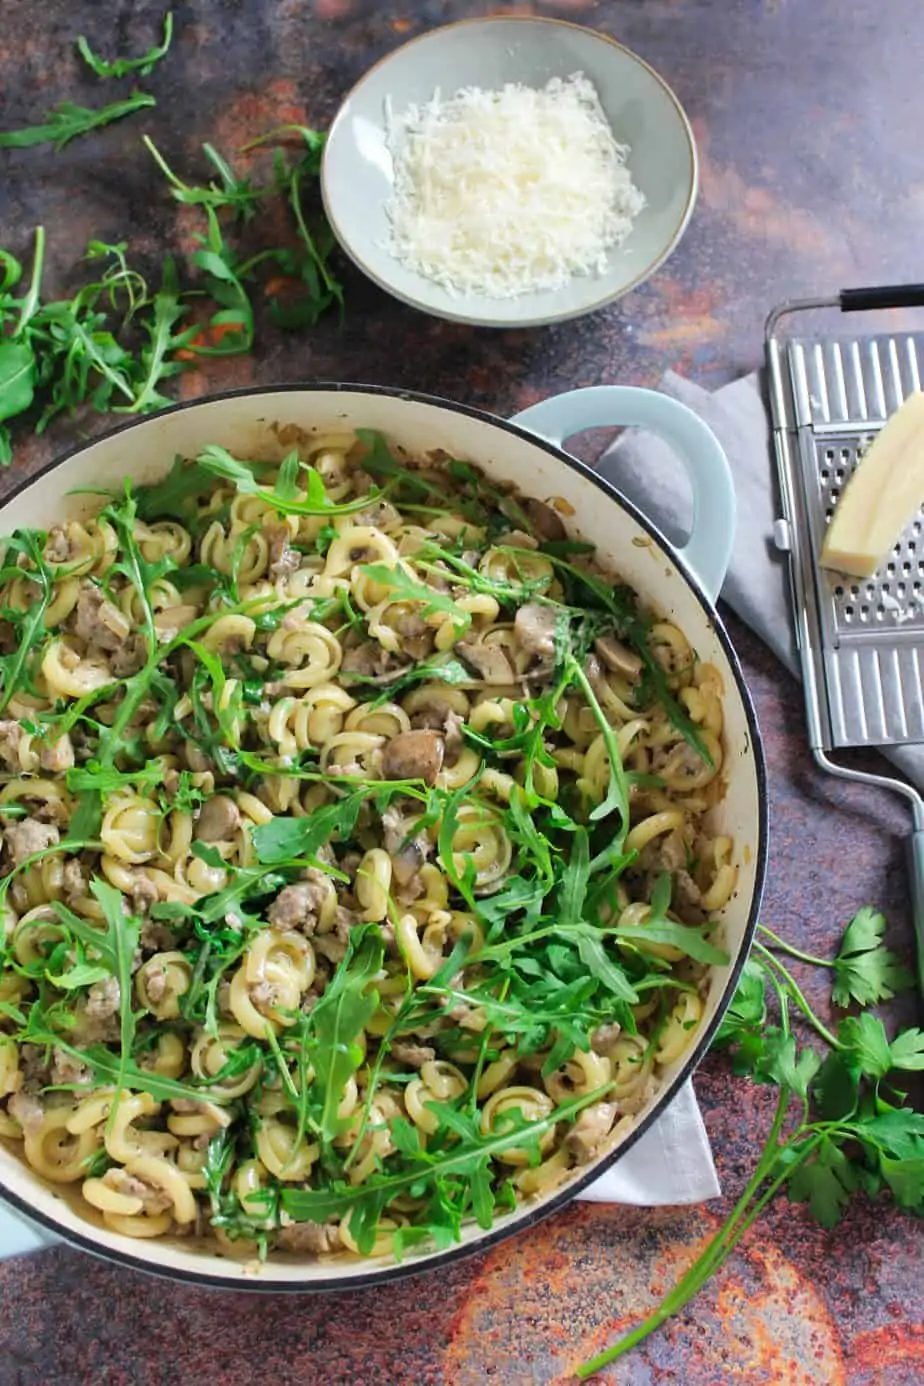 This easy Sausage and Mushroom Pasta with Rocket is a real crowd pleaser. Full of savoury flavour with an added bite of peppery rocket.